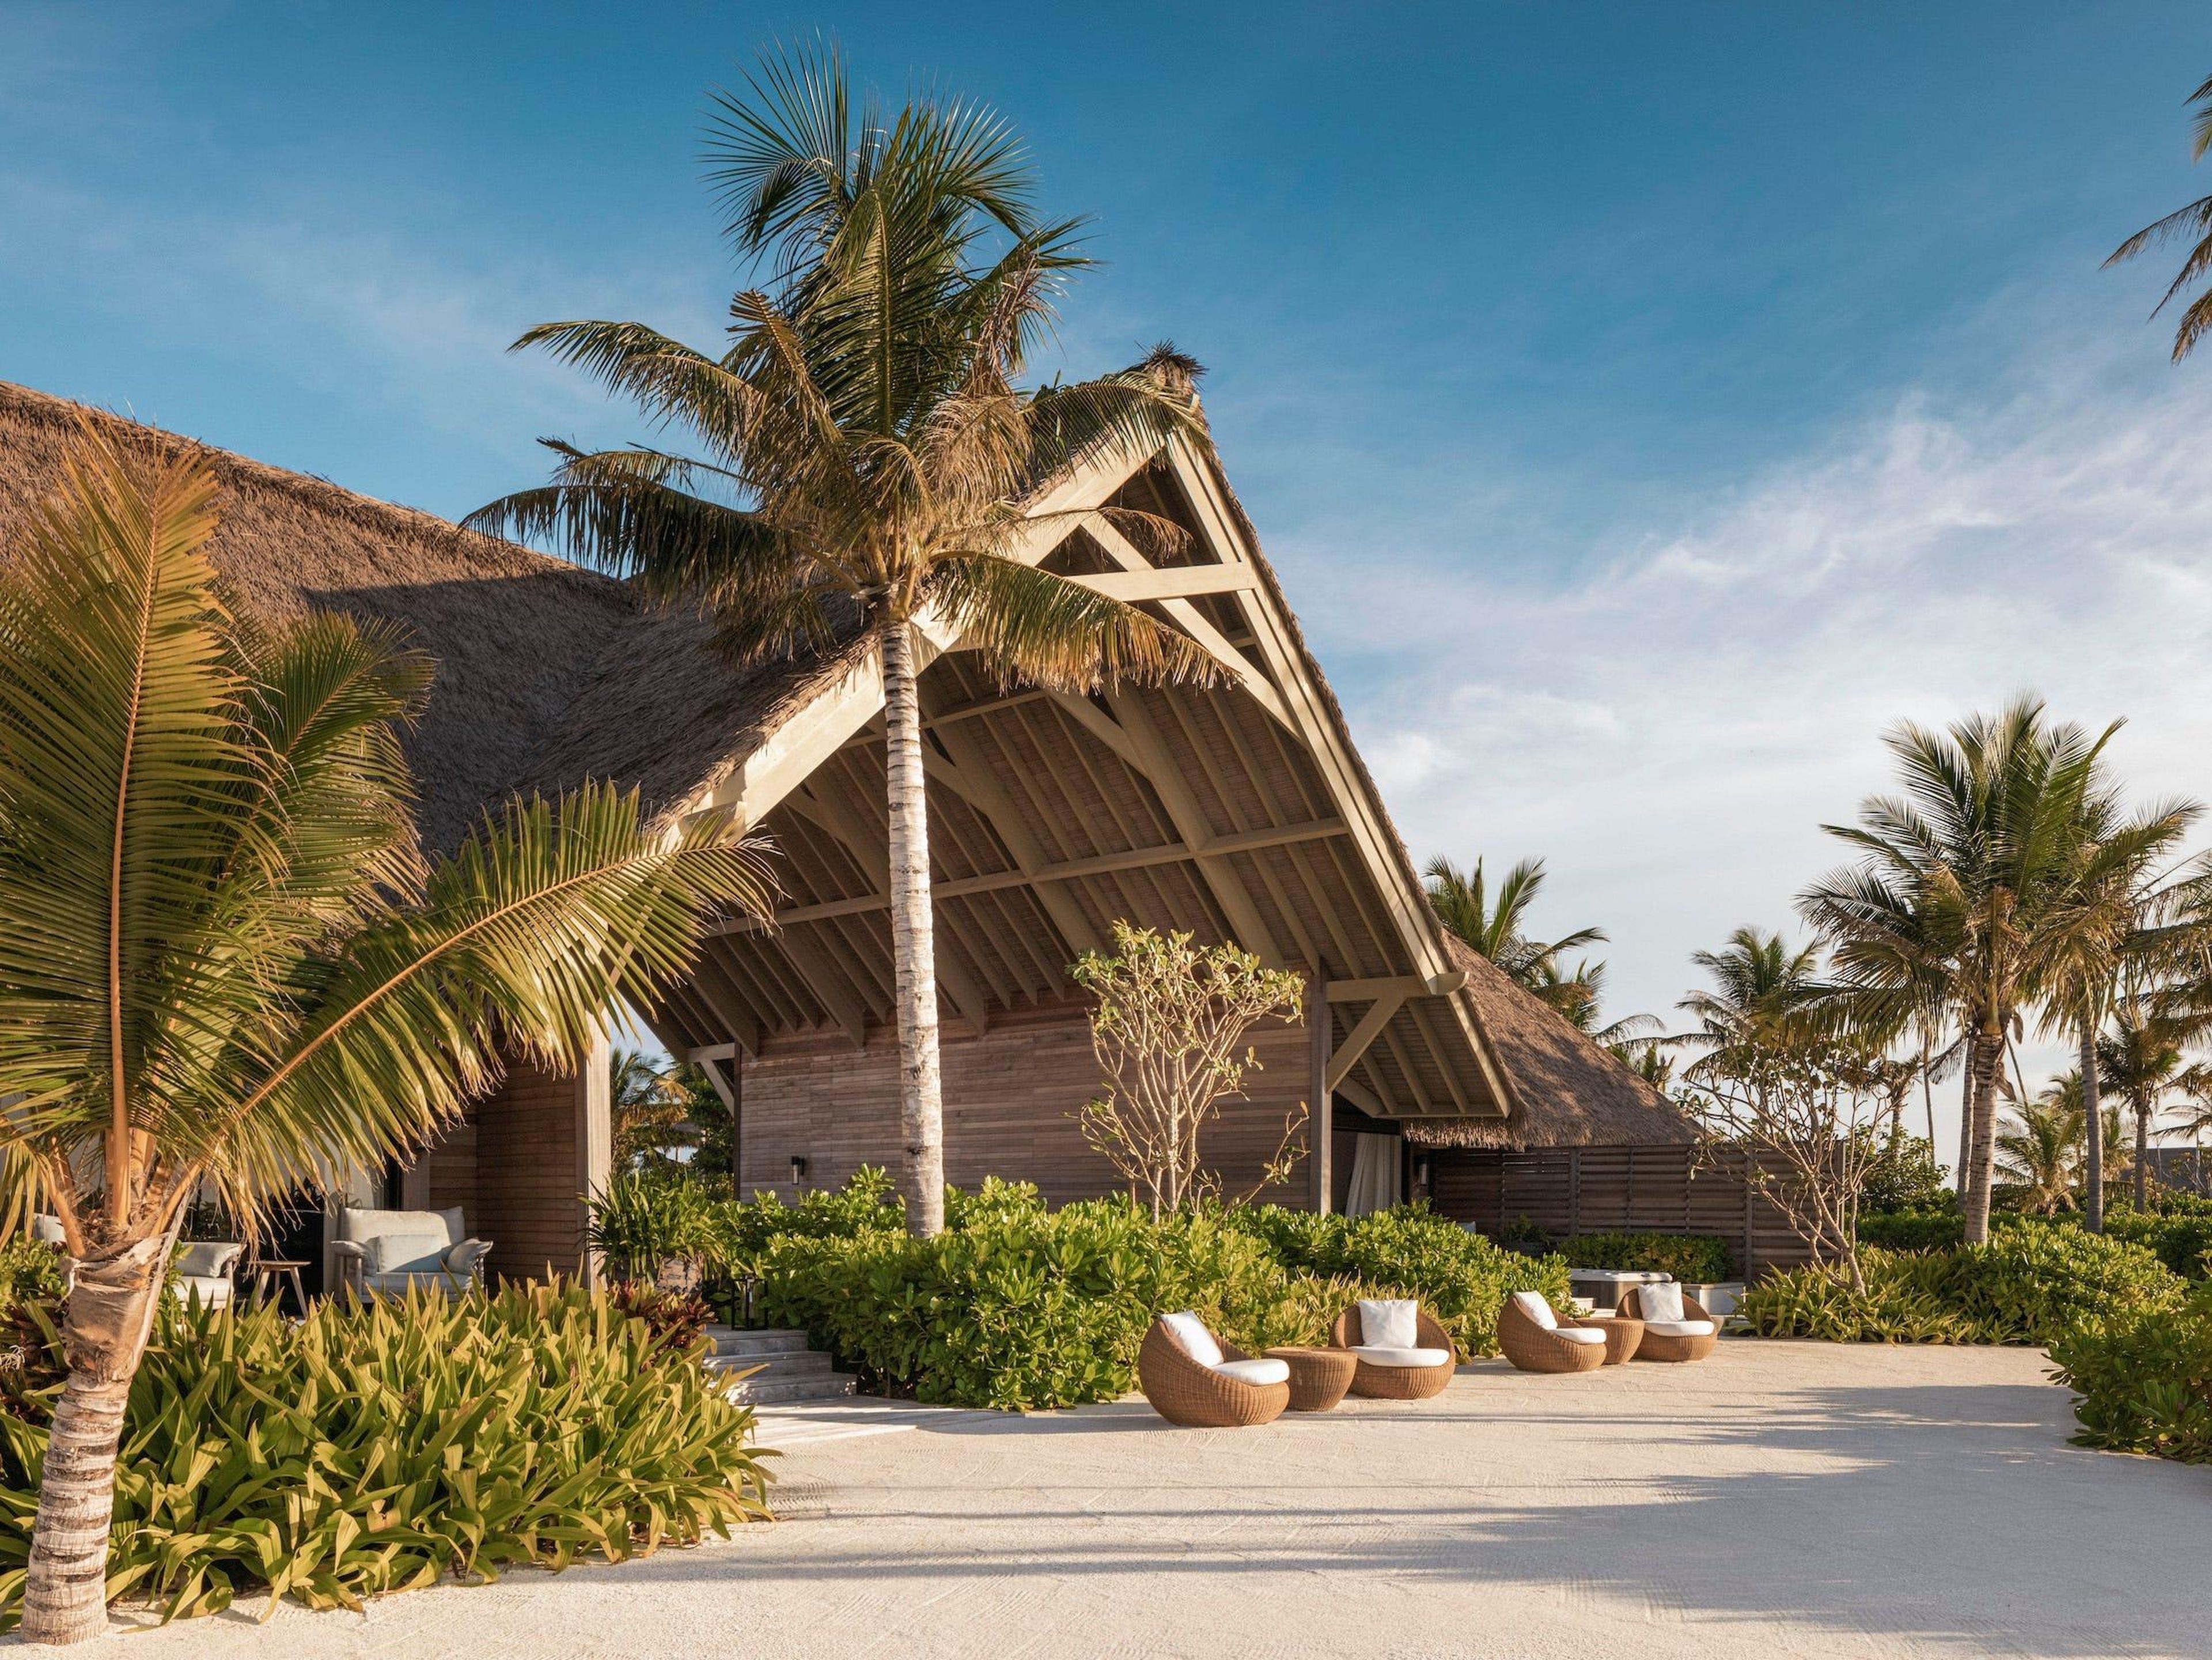 The four-bedroom residence at Waldorf Astoria's Ithaafushi private island in the Maldives.